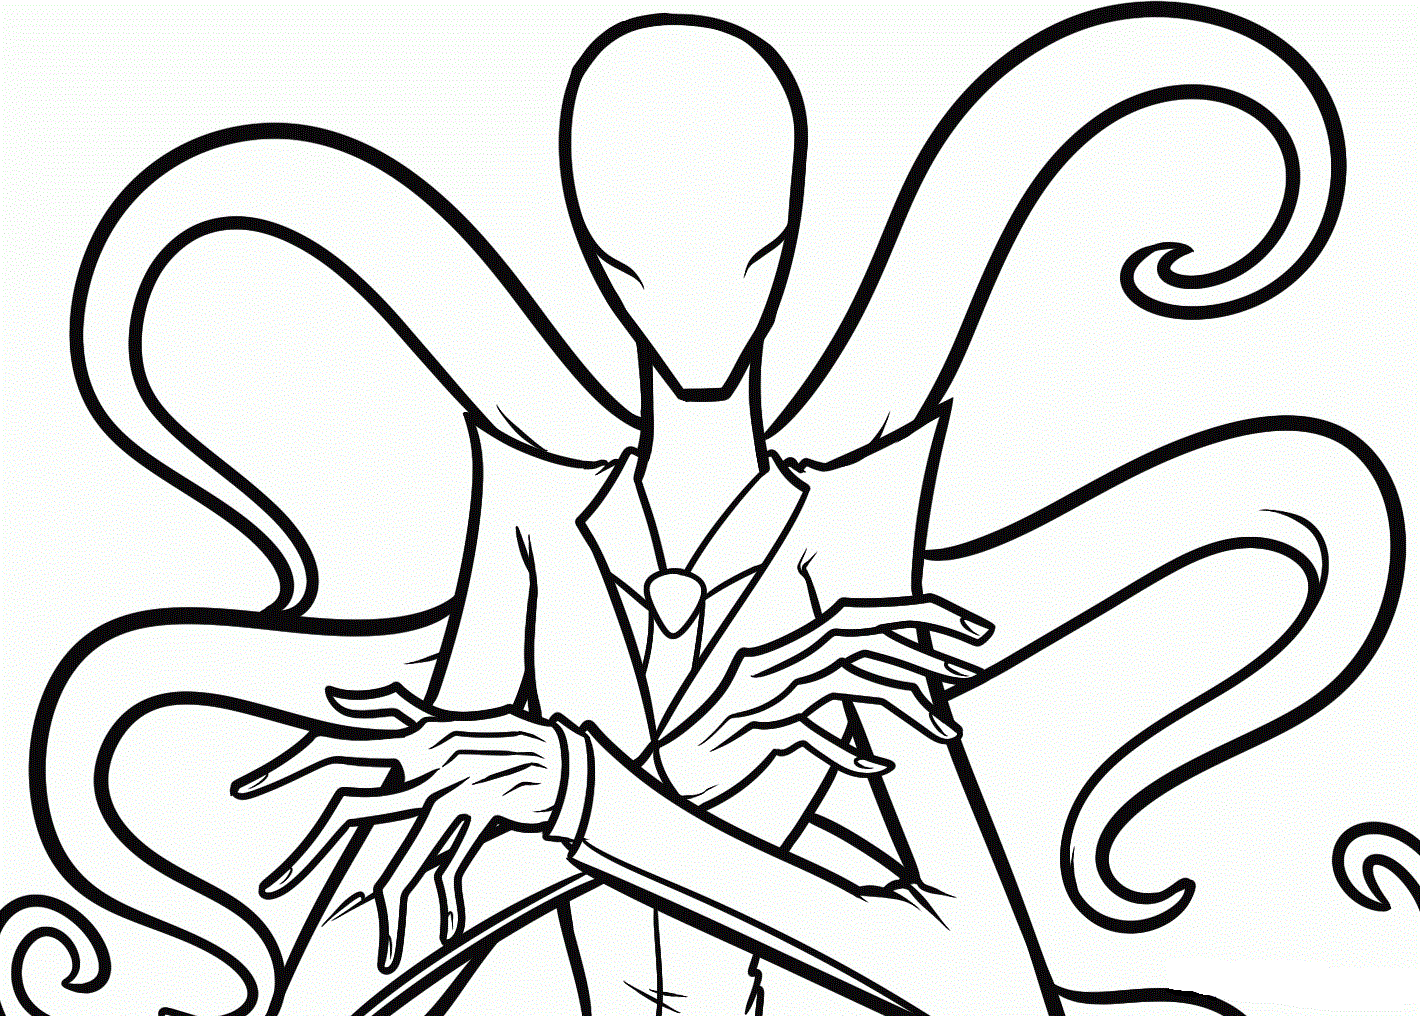 Evil Creepy Slender Man Coloring Page - Free Printable Coloring Pages for  Kids